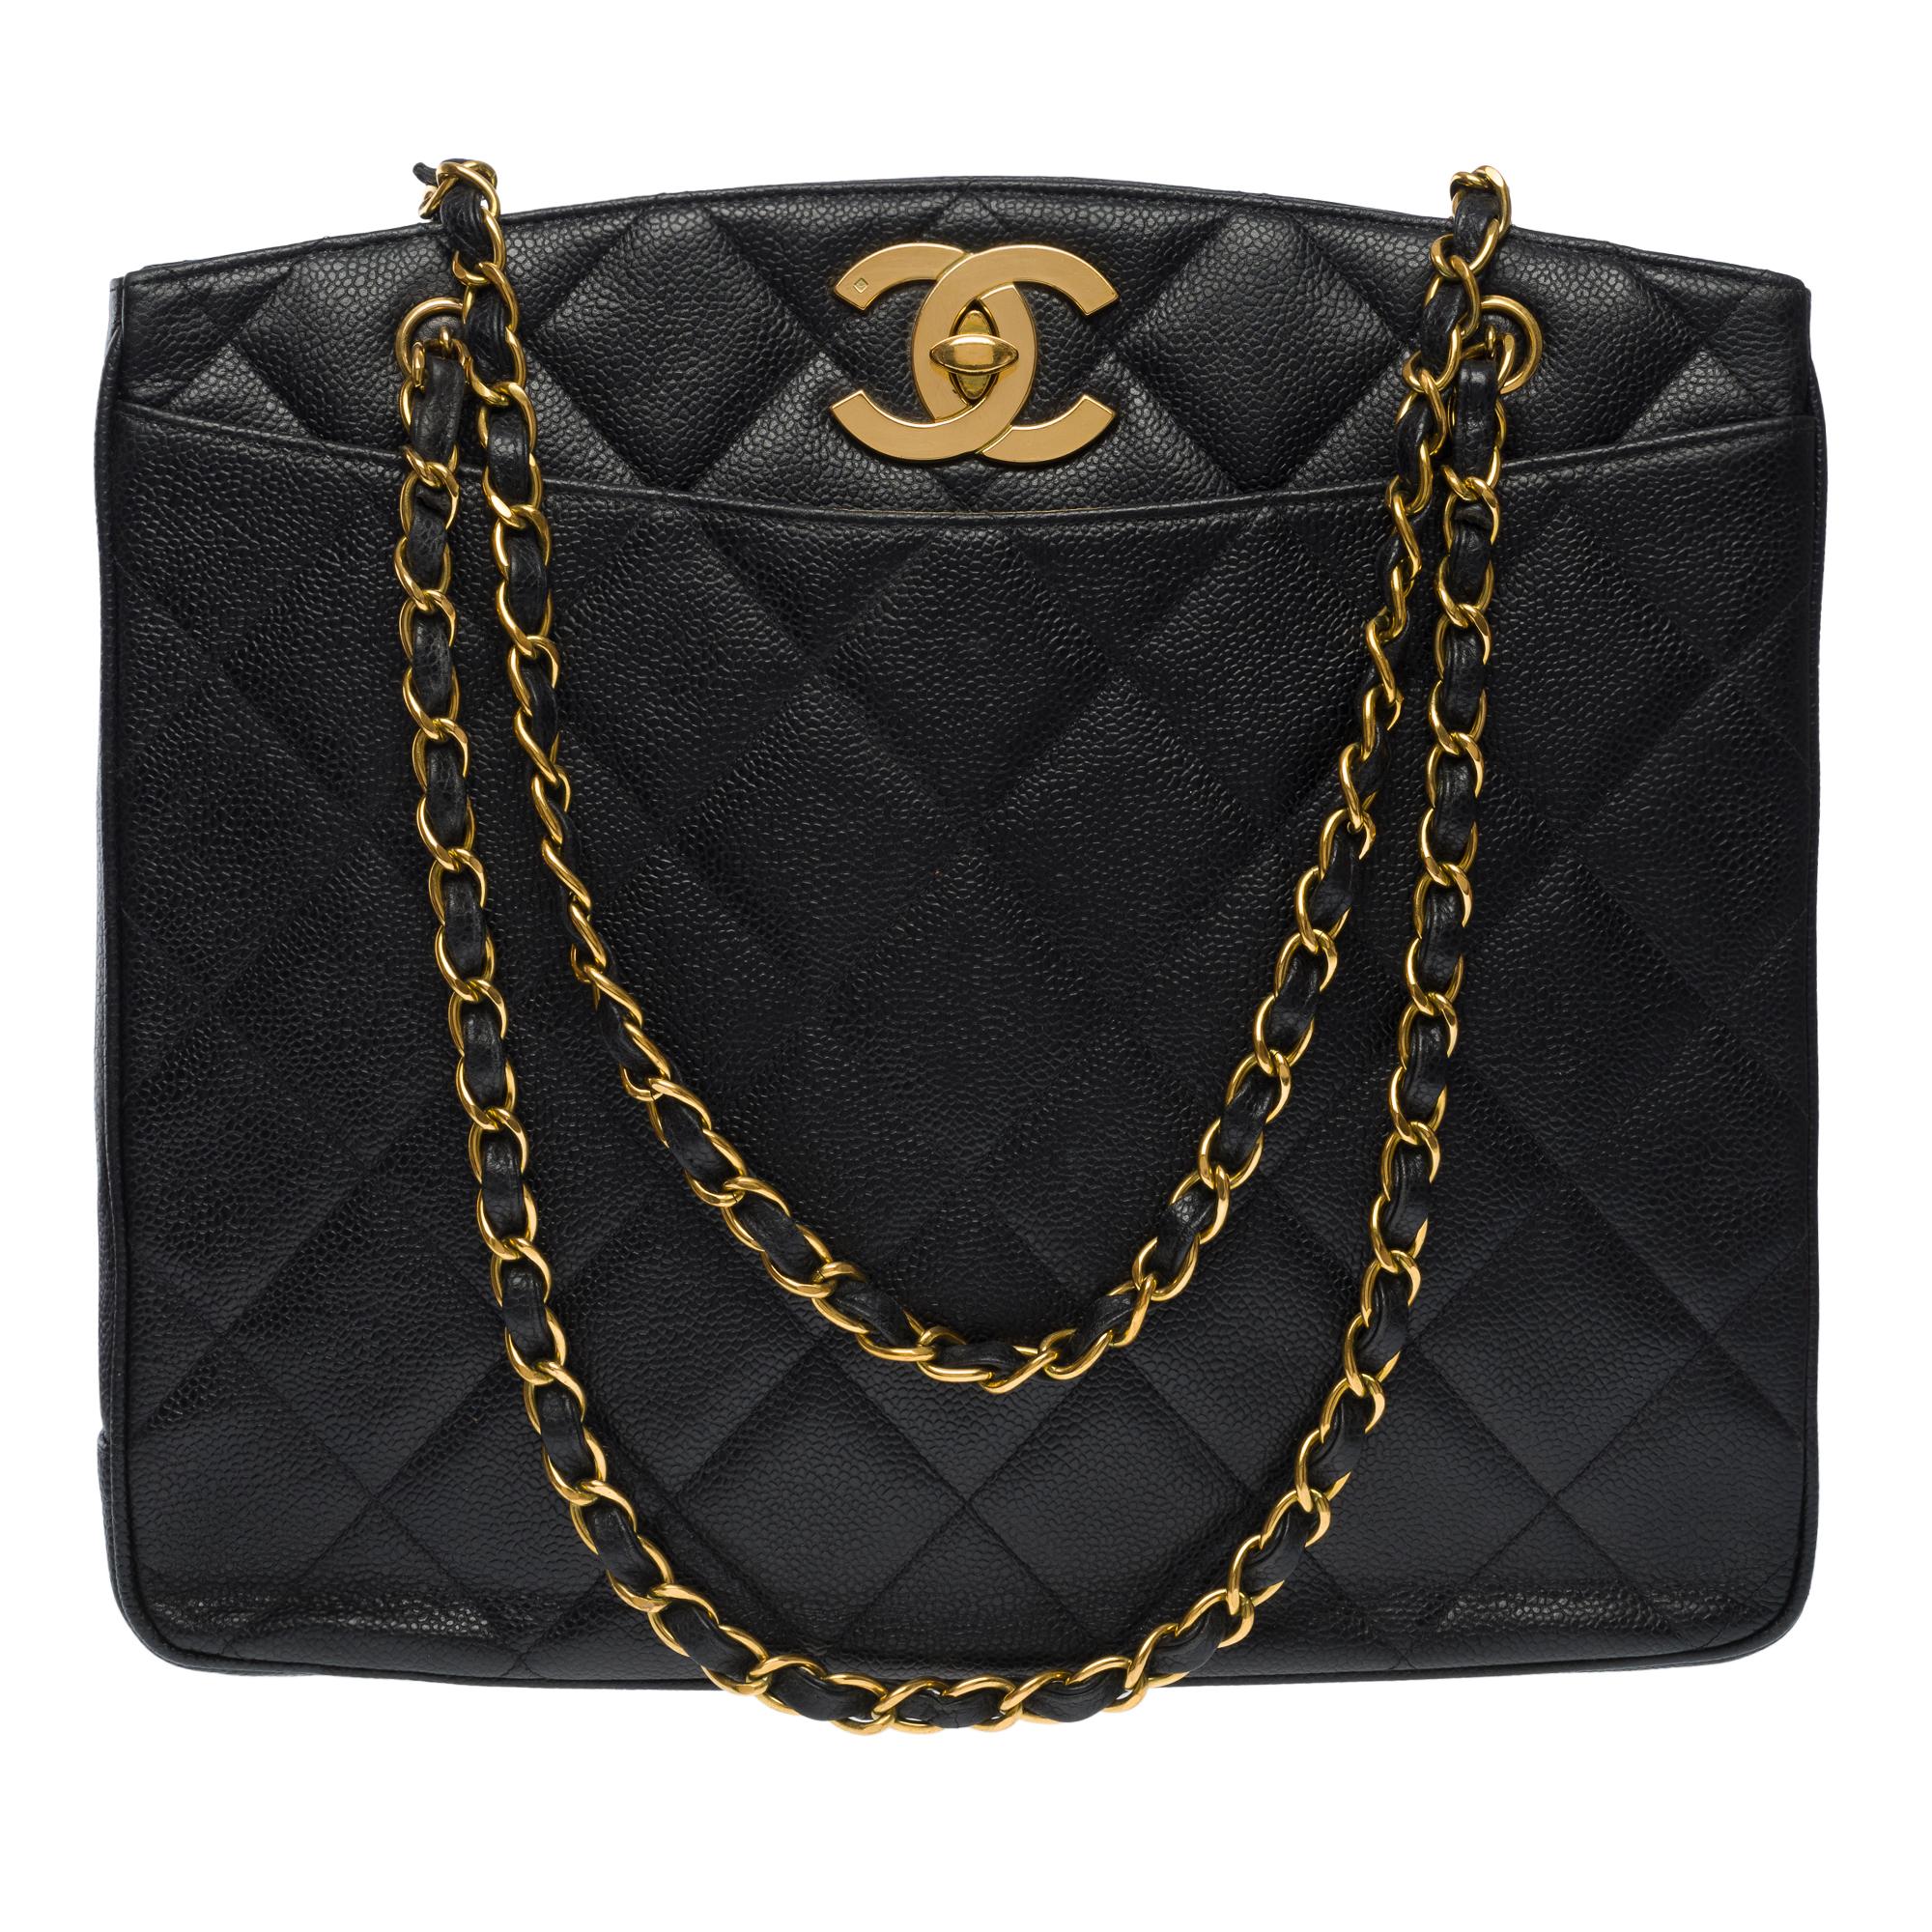 Stunning vintage Chanel Shopping Tote bag in black Caviar quilted leather , gold metal hardware, double chain handle gold metal interlaced black leather for a hand or shoulder carry

Black leather inner lining, 2 zipped pockets
Signature: 